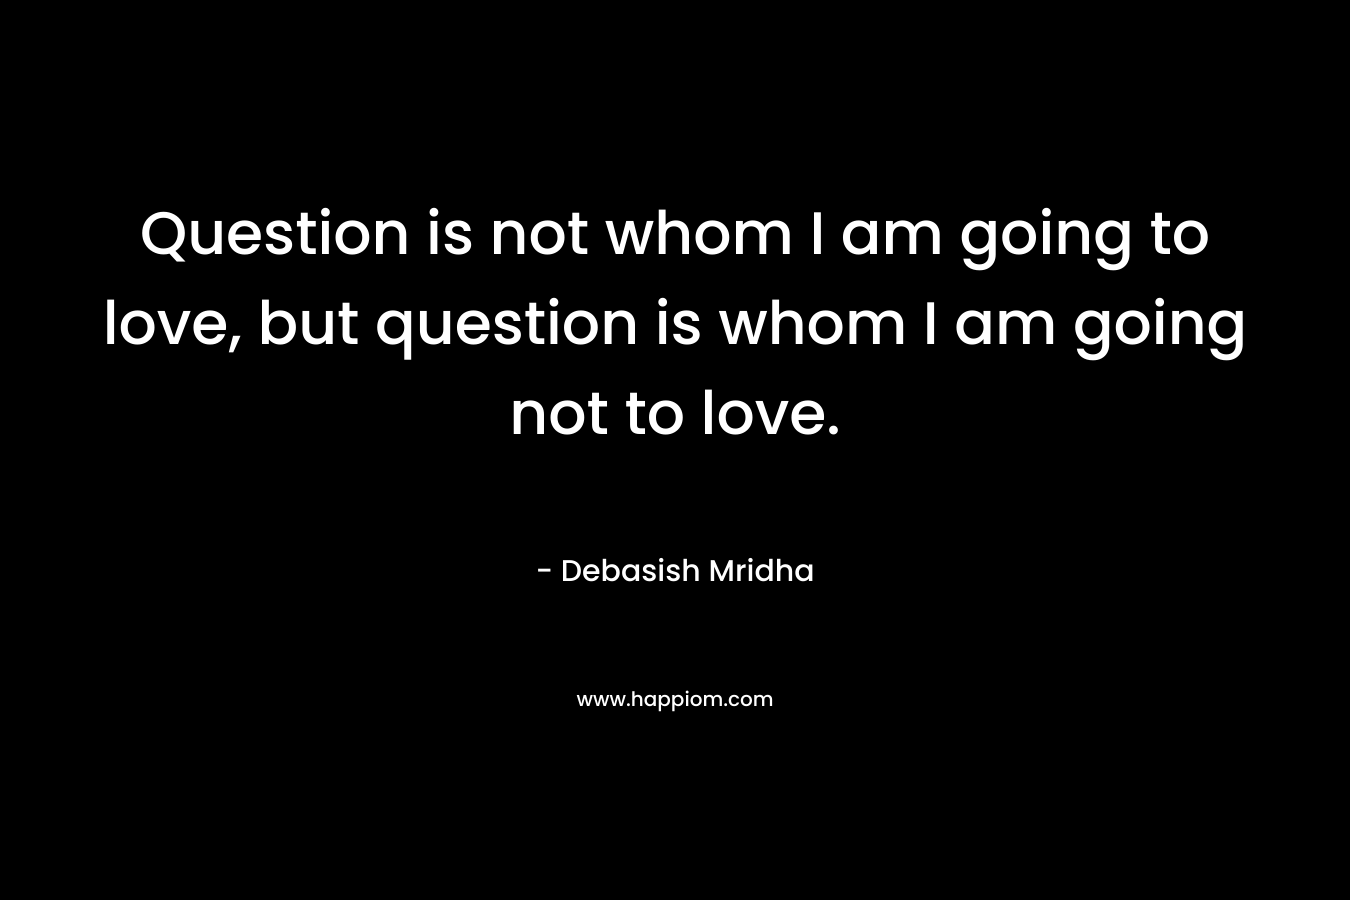 Question is not whom I am going to love, but question is whom I am going not to love.